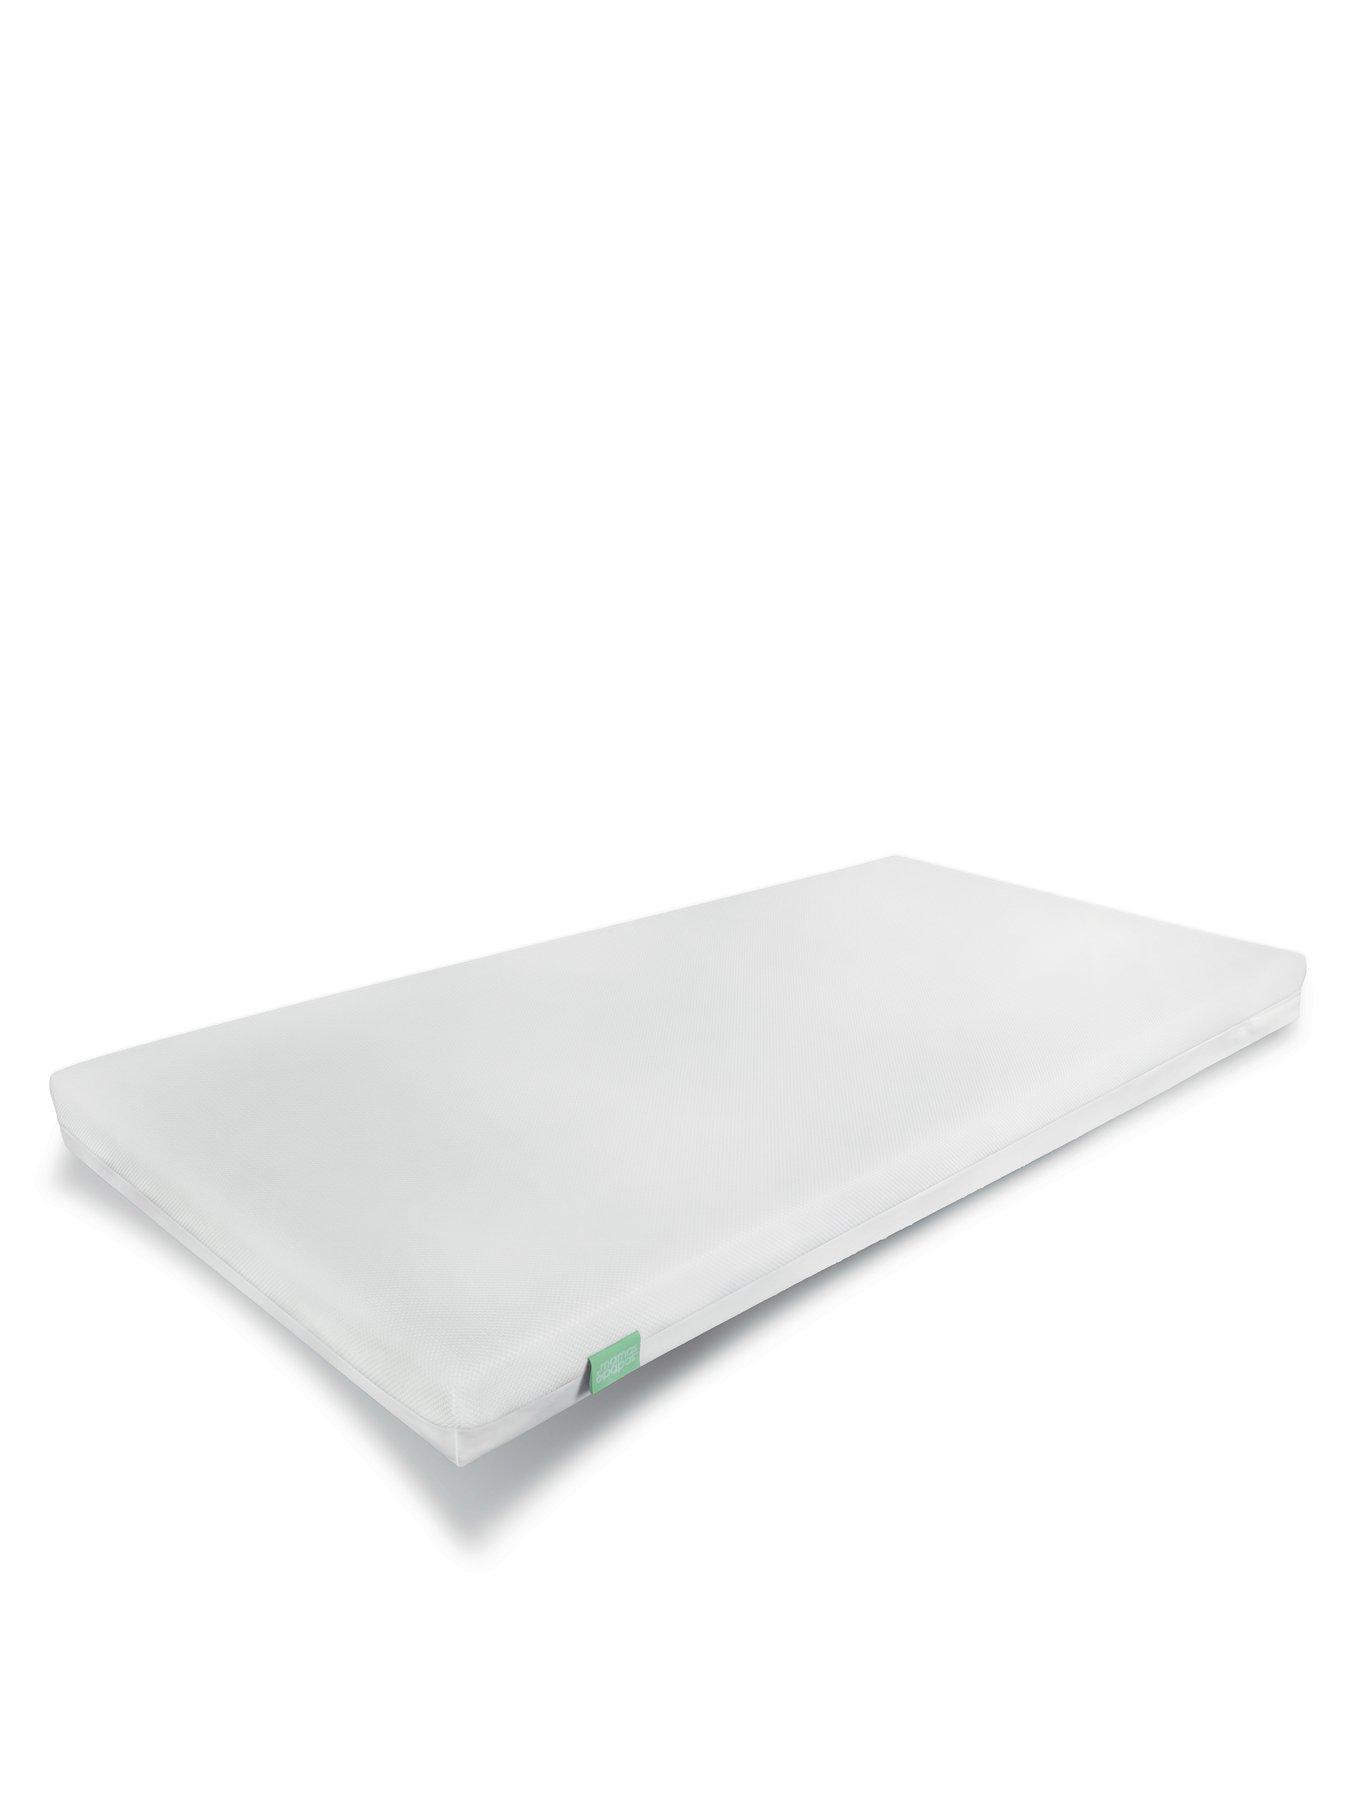 mamas and papas essential sprung cotbed mattress